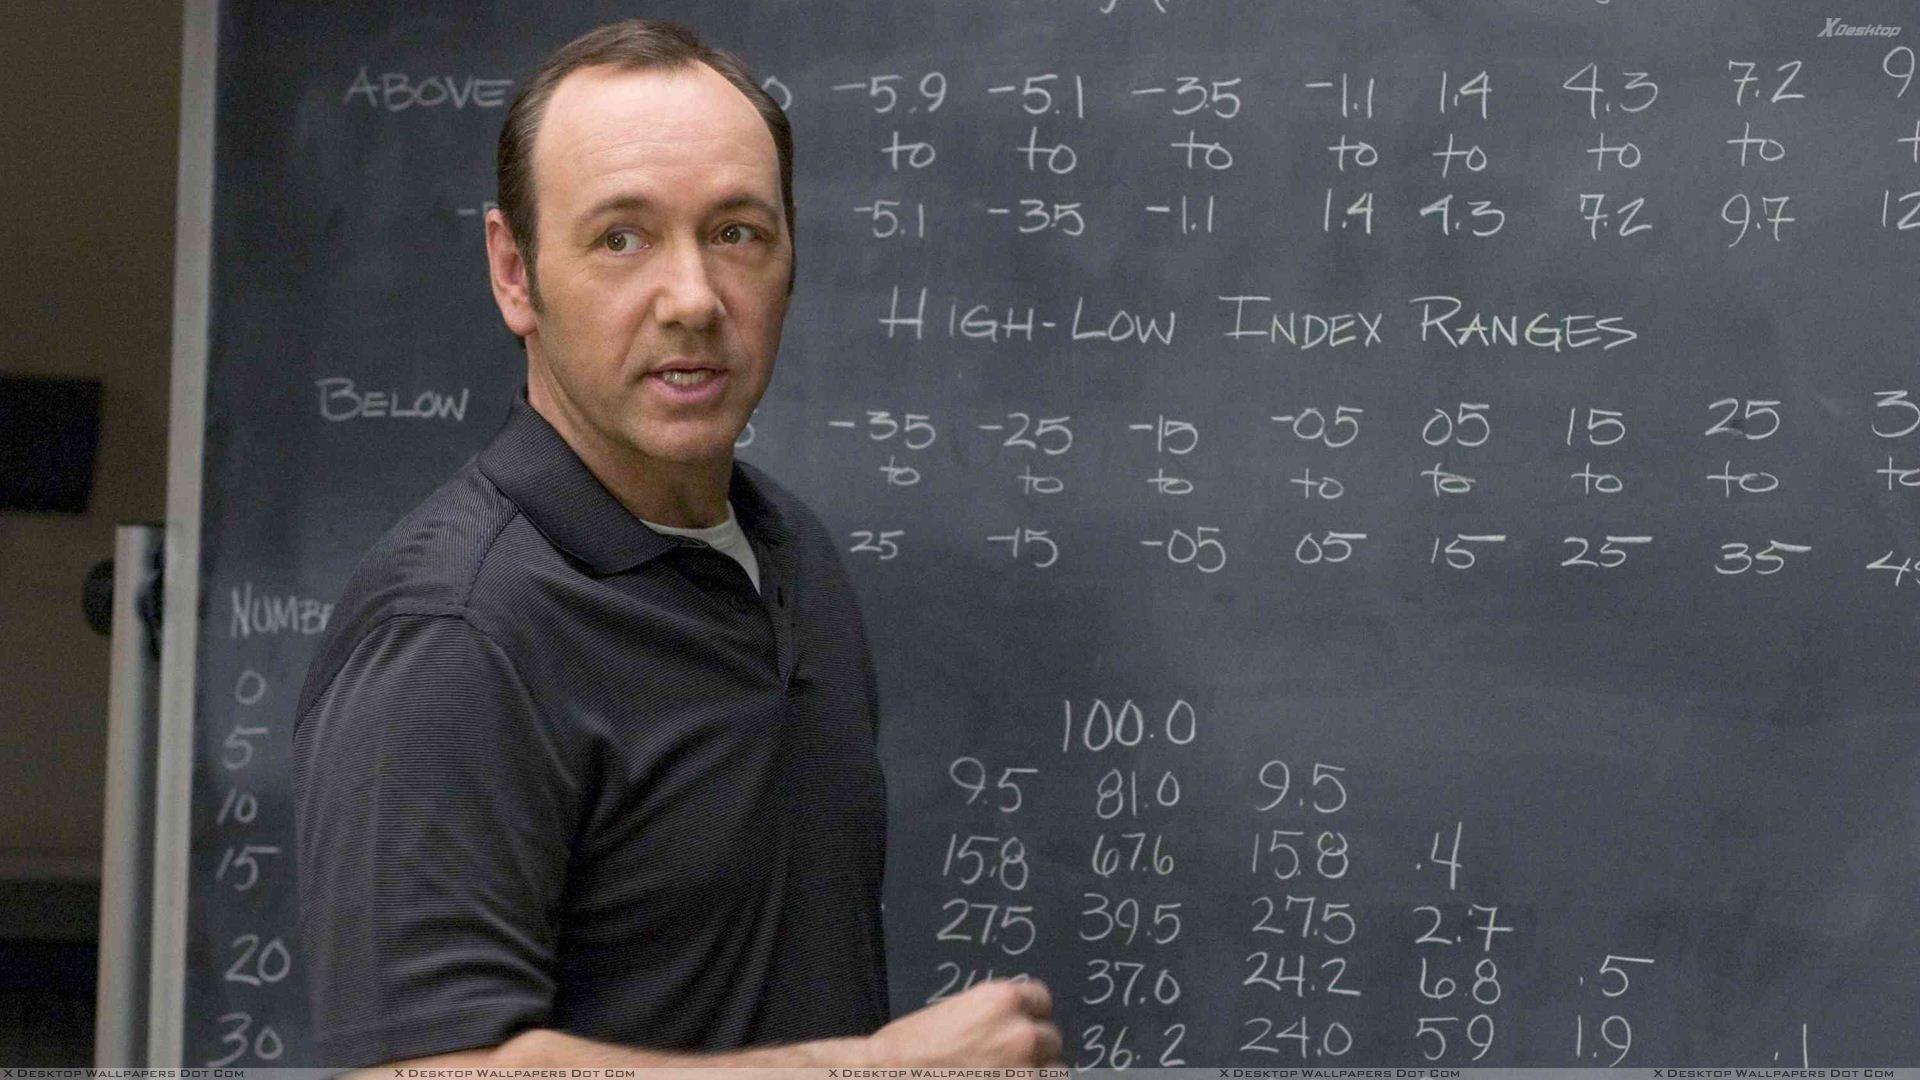 Kevin Spacey Wallpaper, Photo & Image in HD